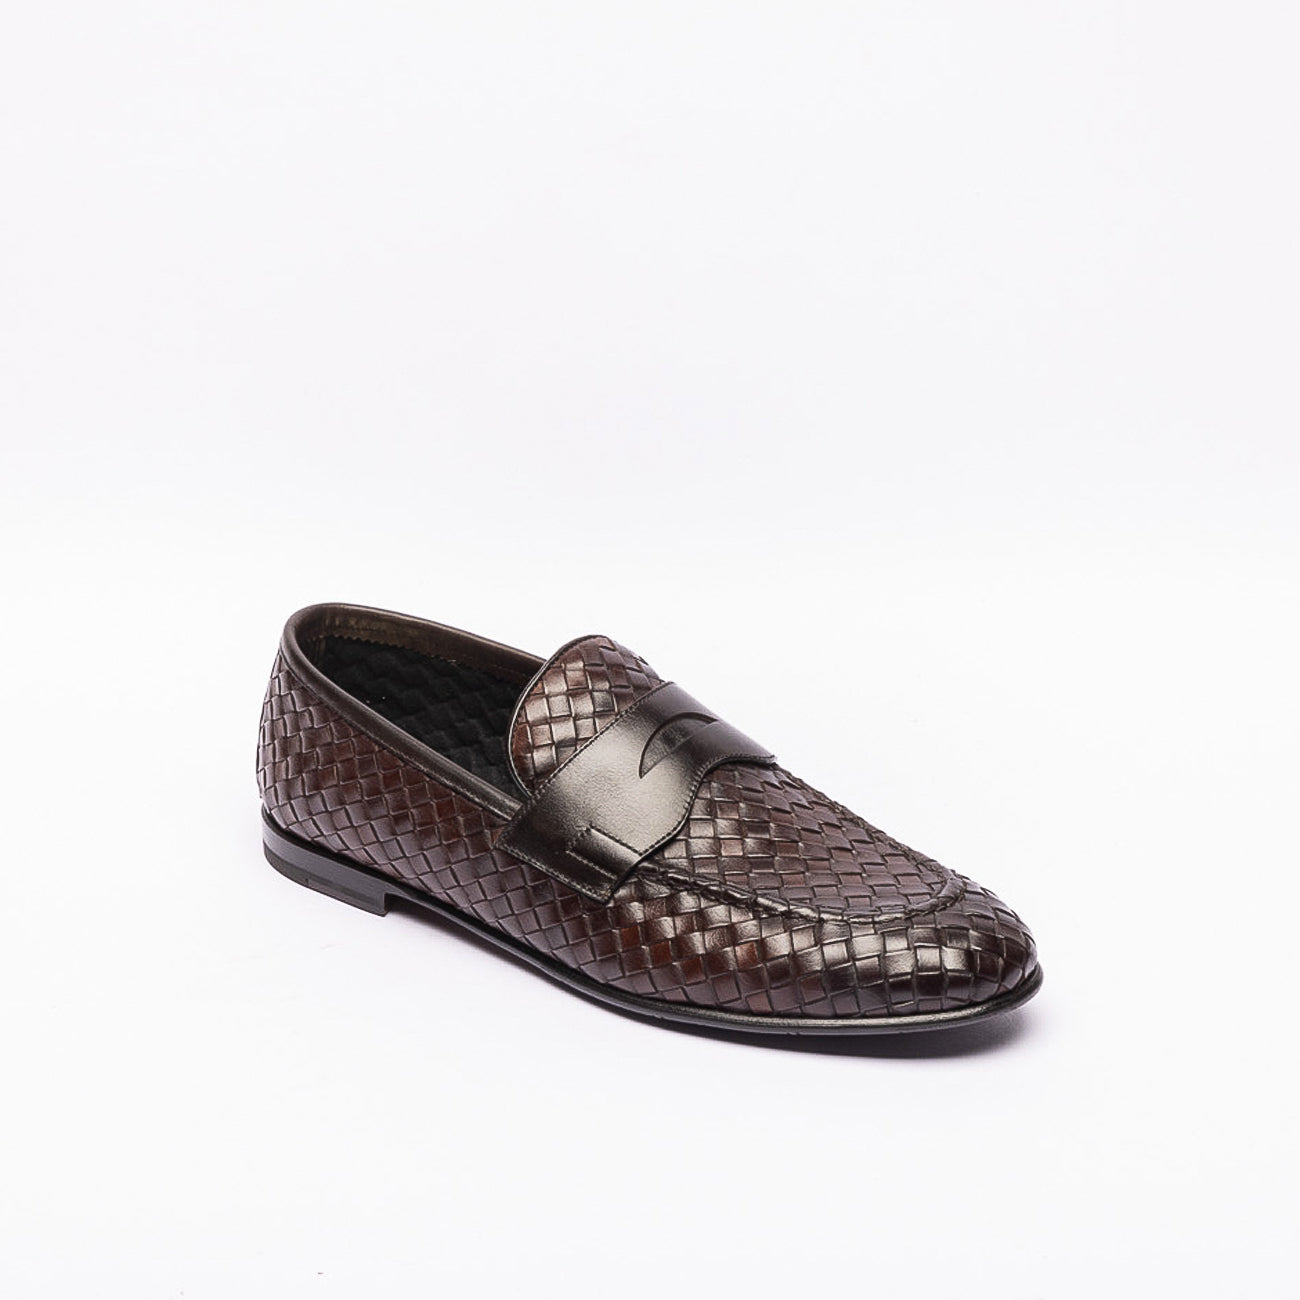 Barrett 231u040.1 penny loafer in brown woven leather